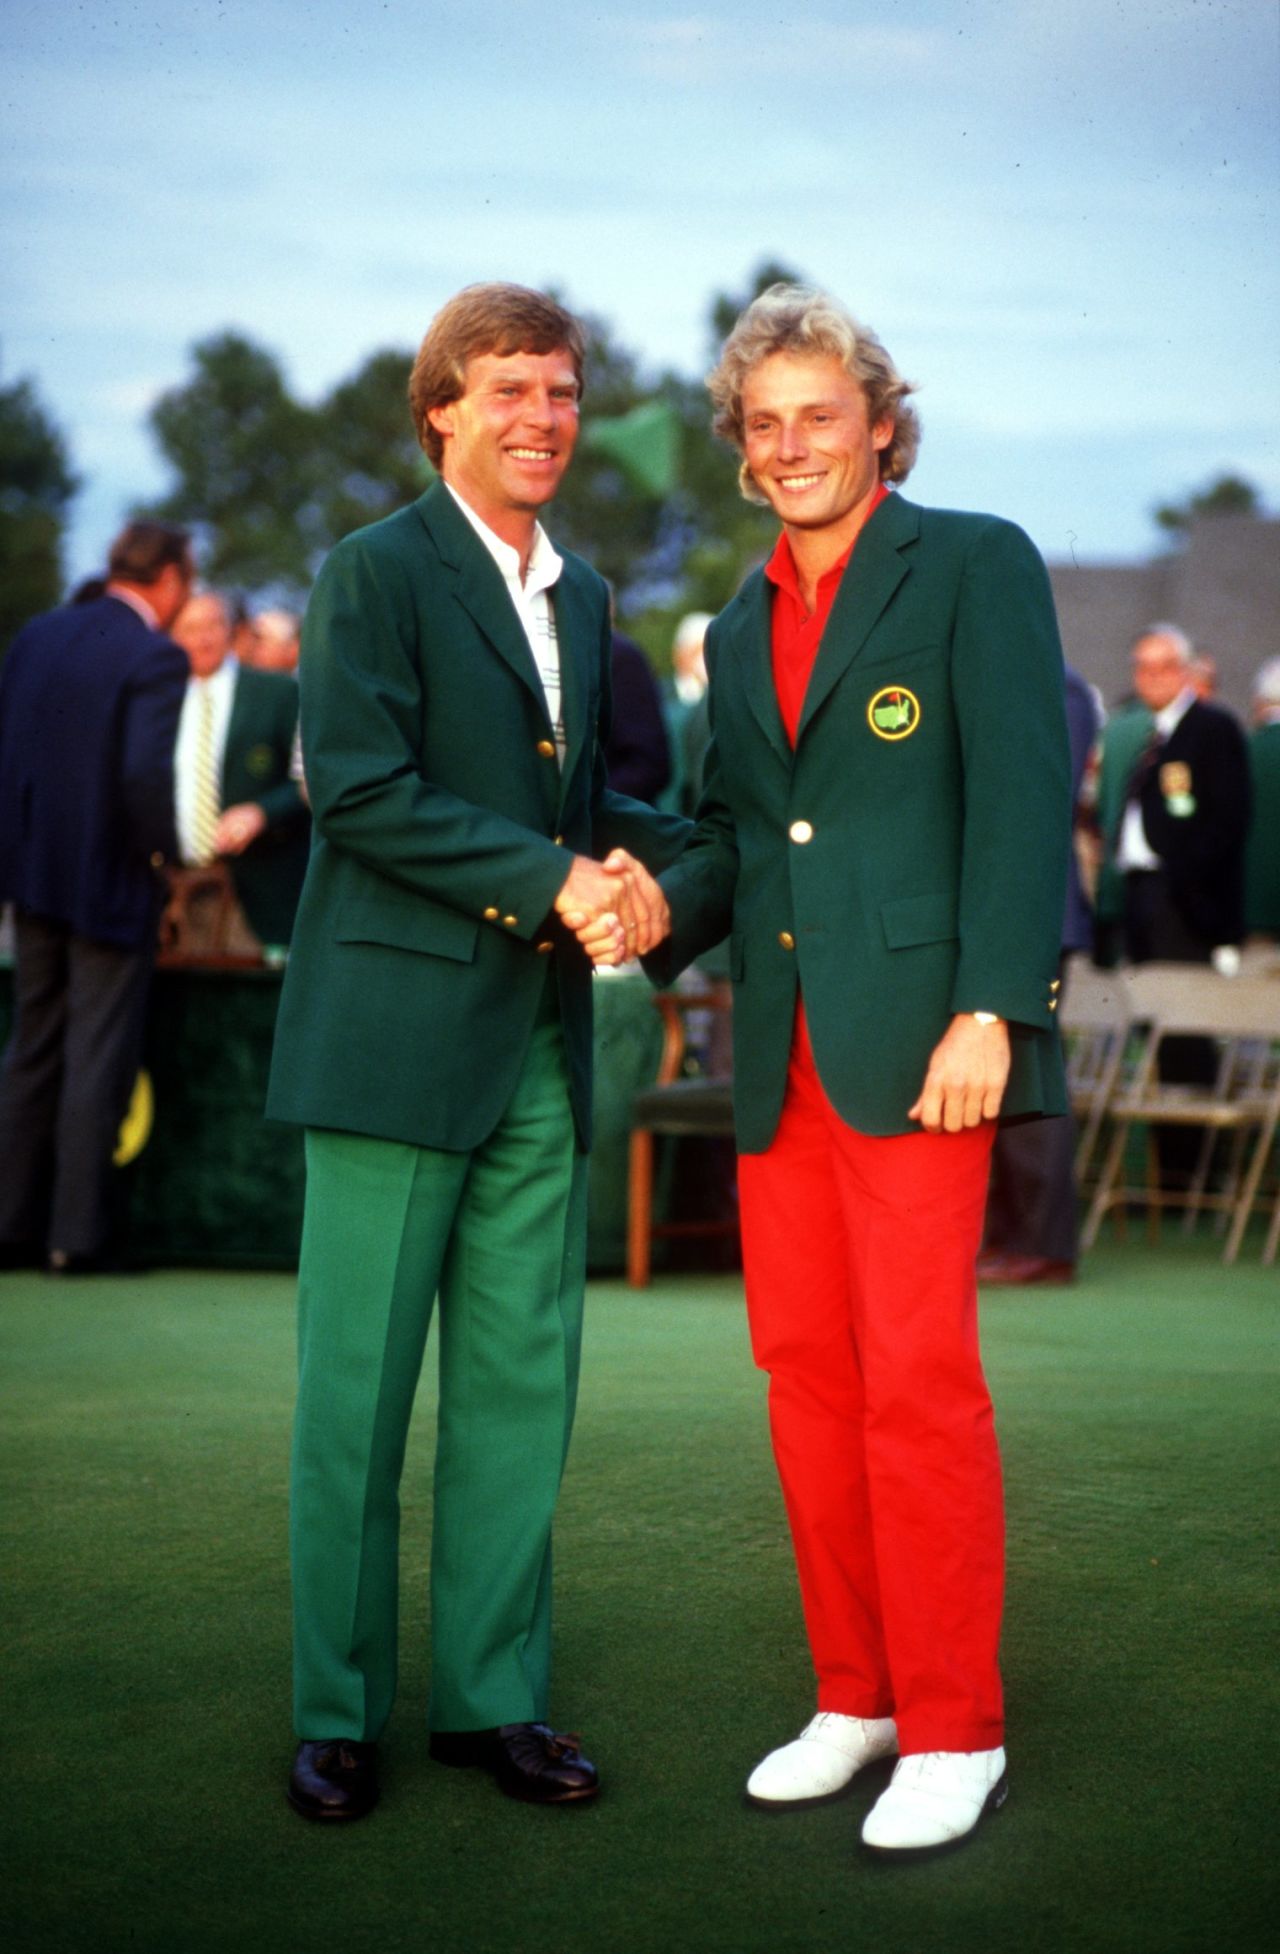 Langer's most notable successes have come at the Masters, where he first donned the Green Jacket as champion in 1985.